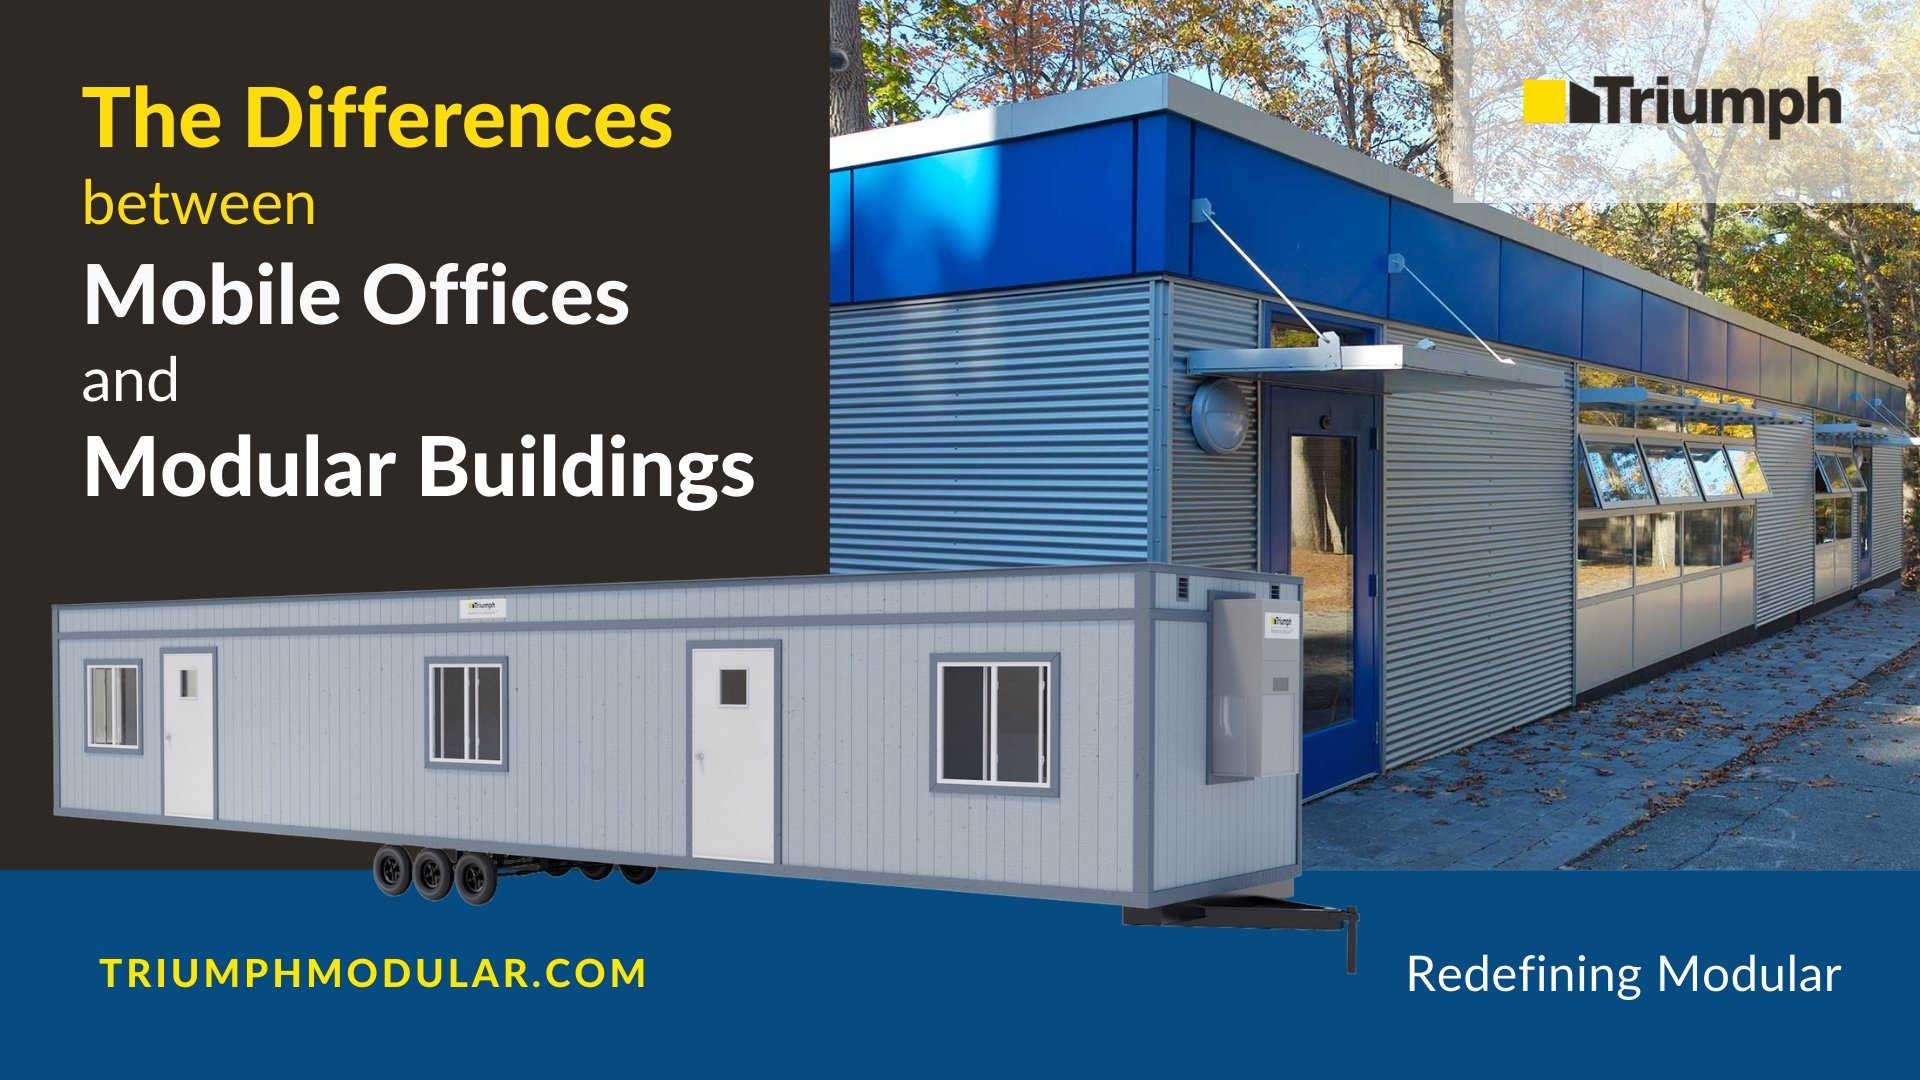 mobile-offices-vs-modular-buildings-featured-image